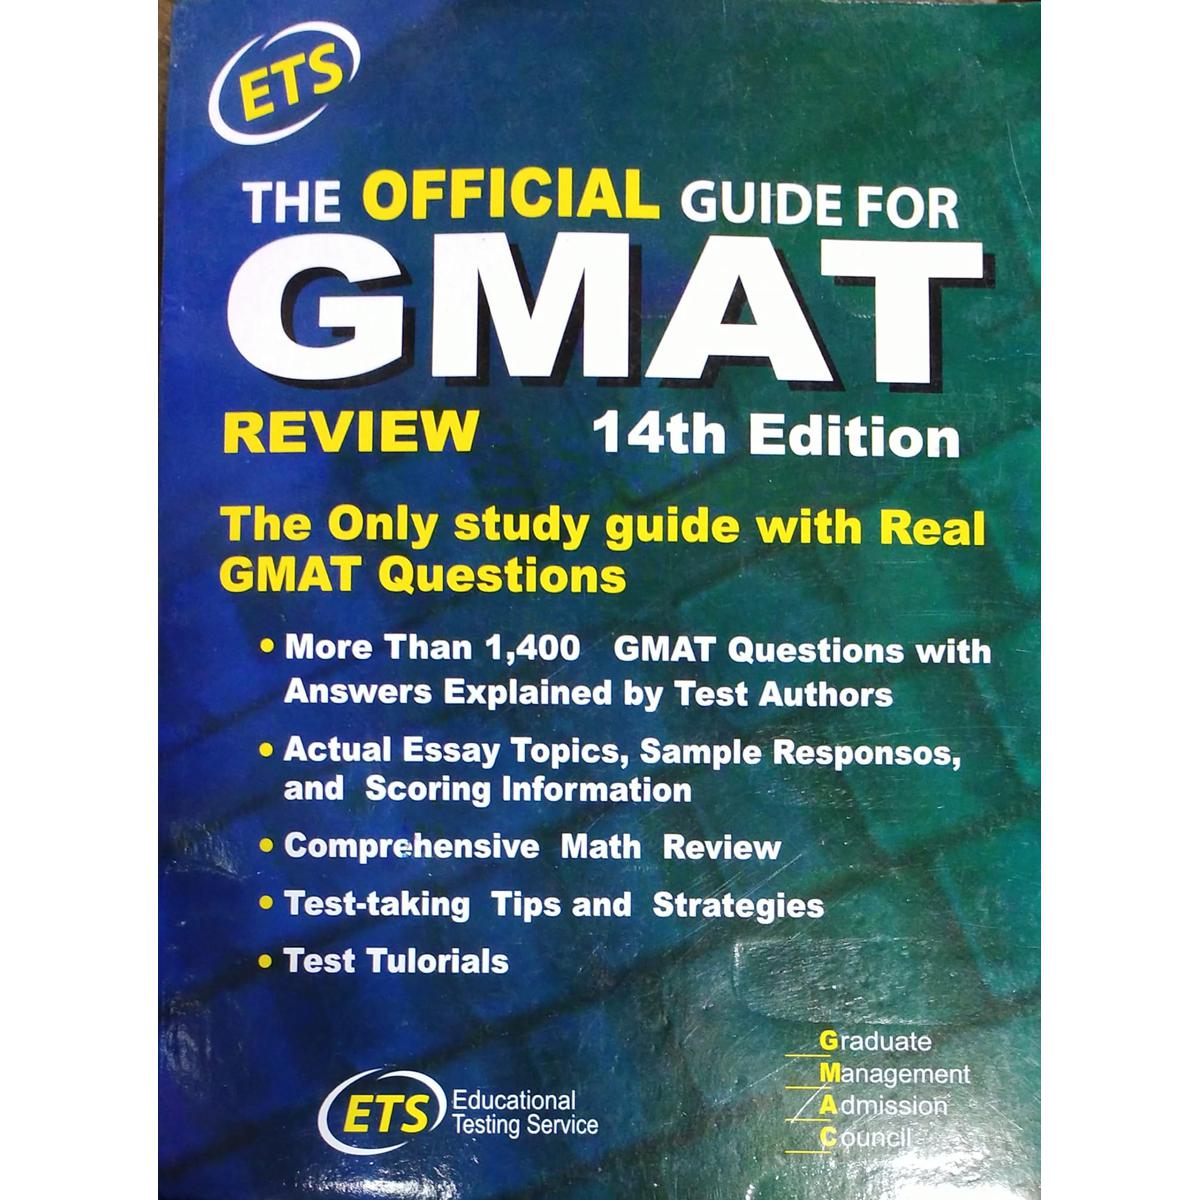 ETS Official Guide for GMAT Review